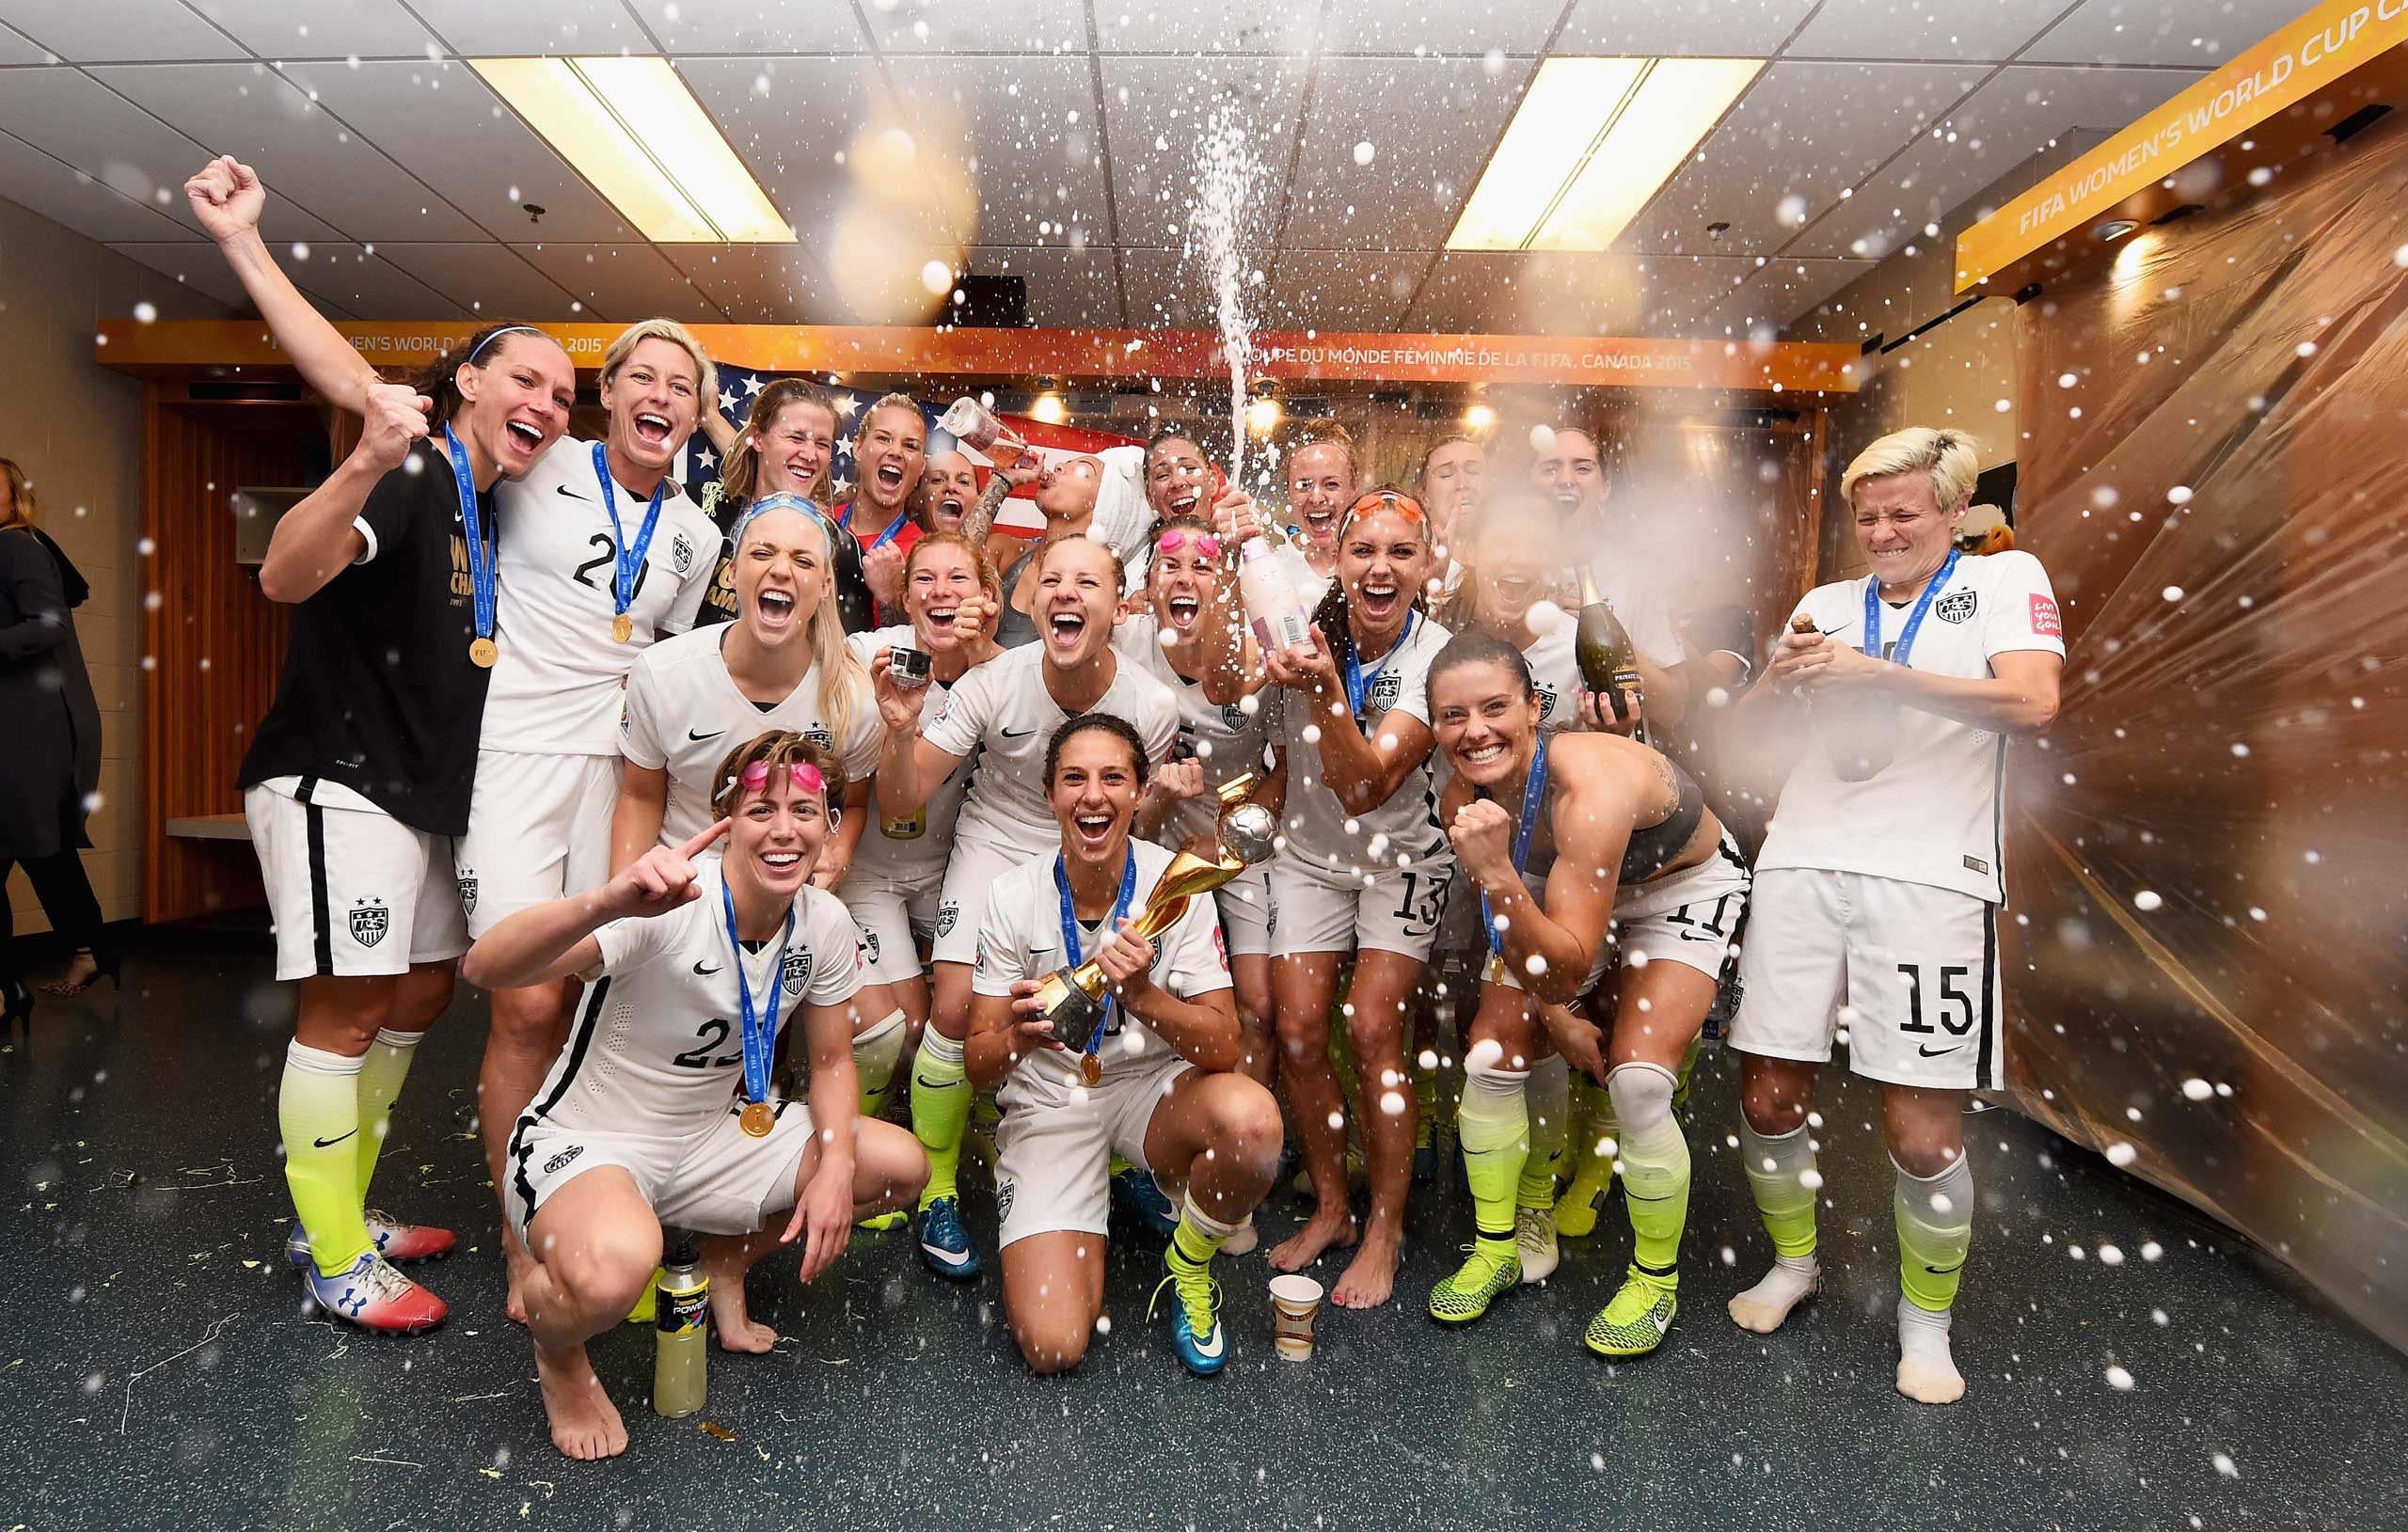 Carli Lloyd of USA celebrates with the trophy and her team mates in the locker room after winning the FIFA Women's World Cup 2015 Final between USA and Japan at BC Place Stadium on July 5, 2015 in Vancouver, Canada. (Lars Baron—Getty Images)